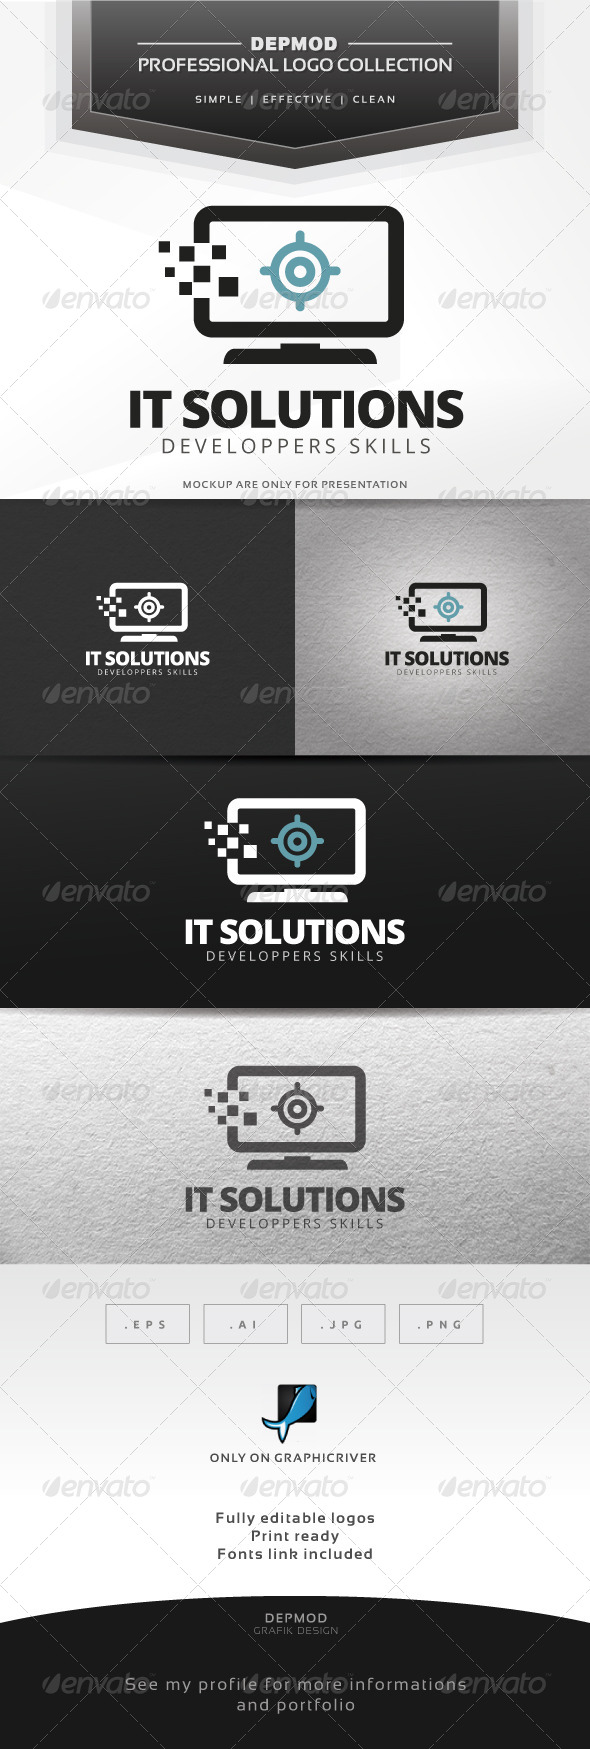 GraphicRiver IT Solutions Logo 7673471